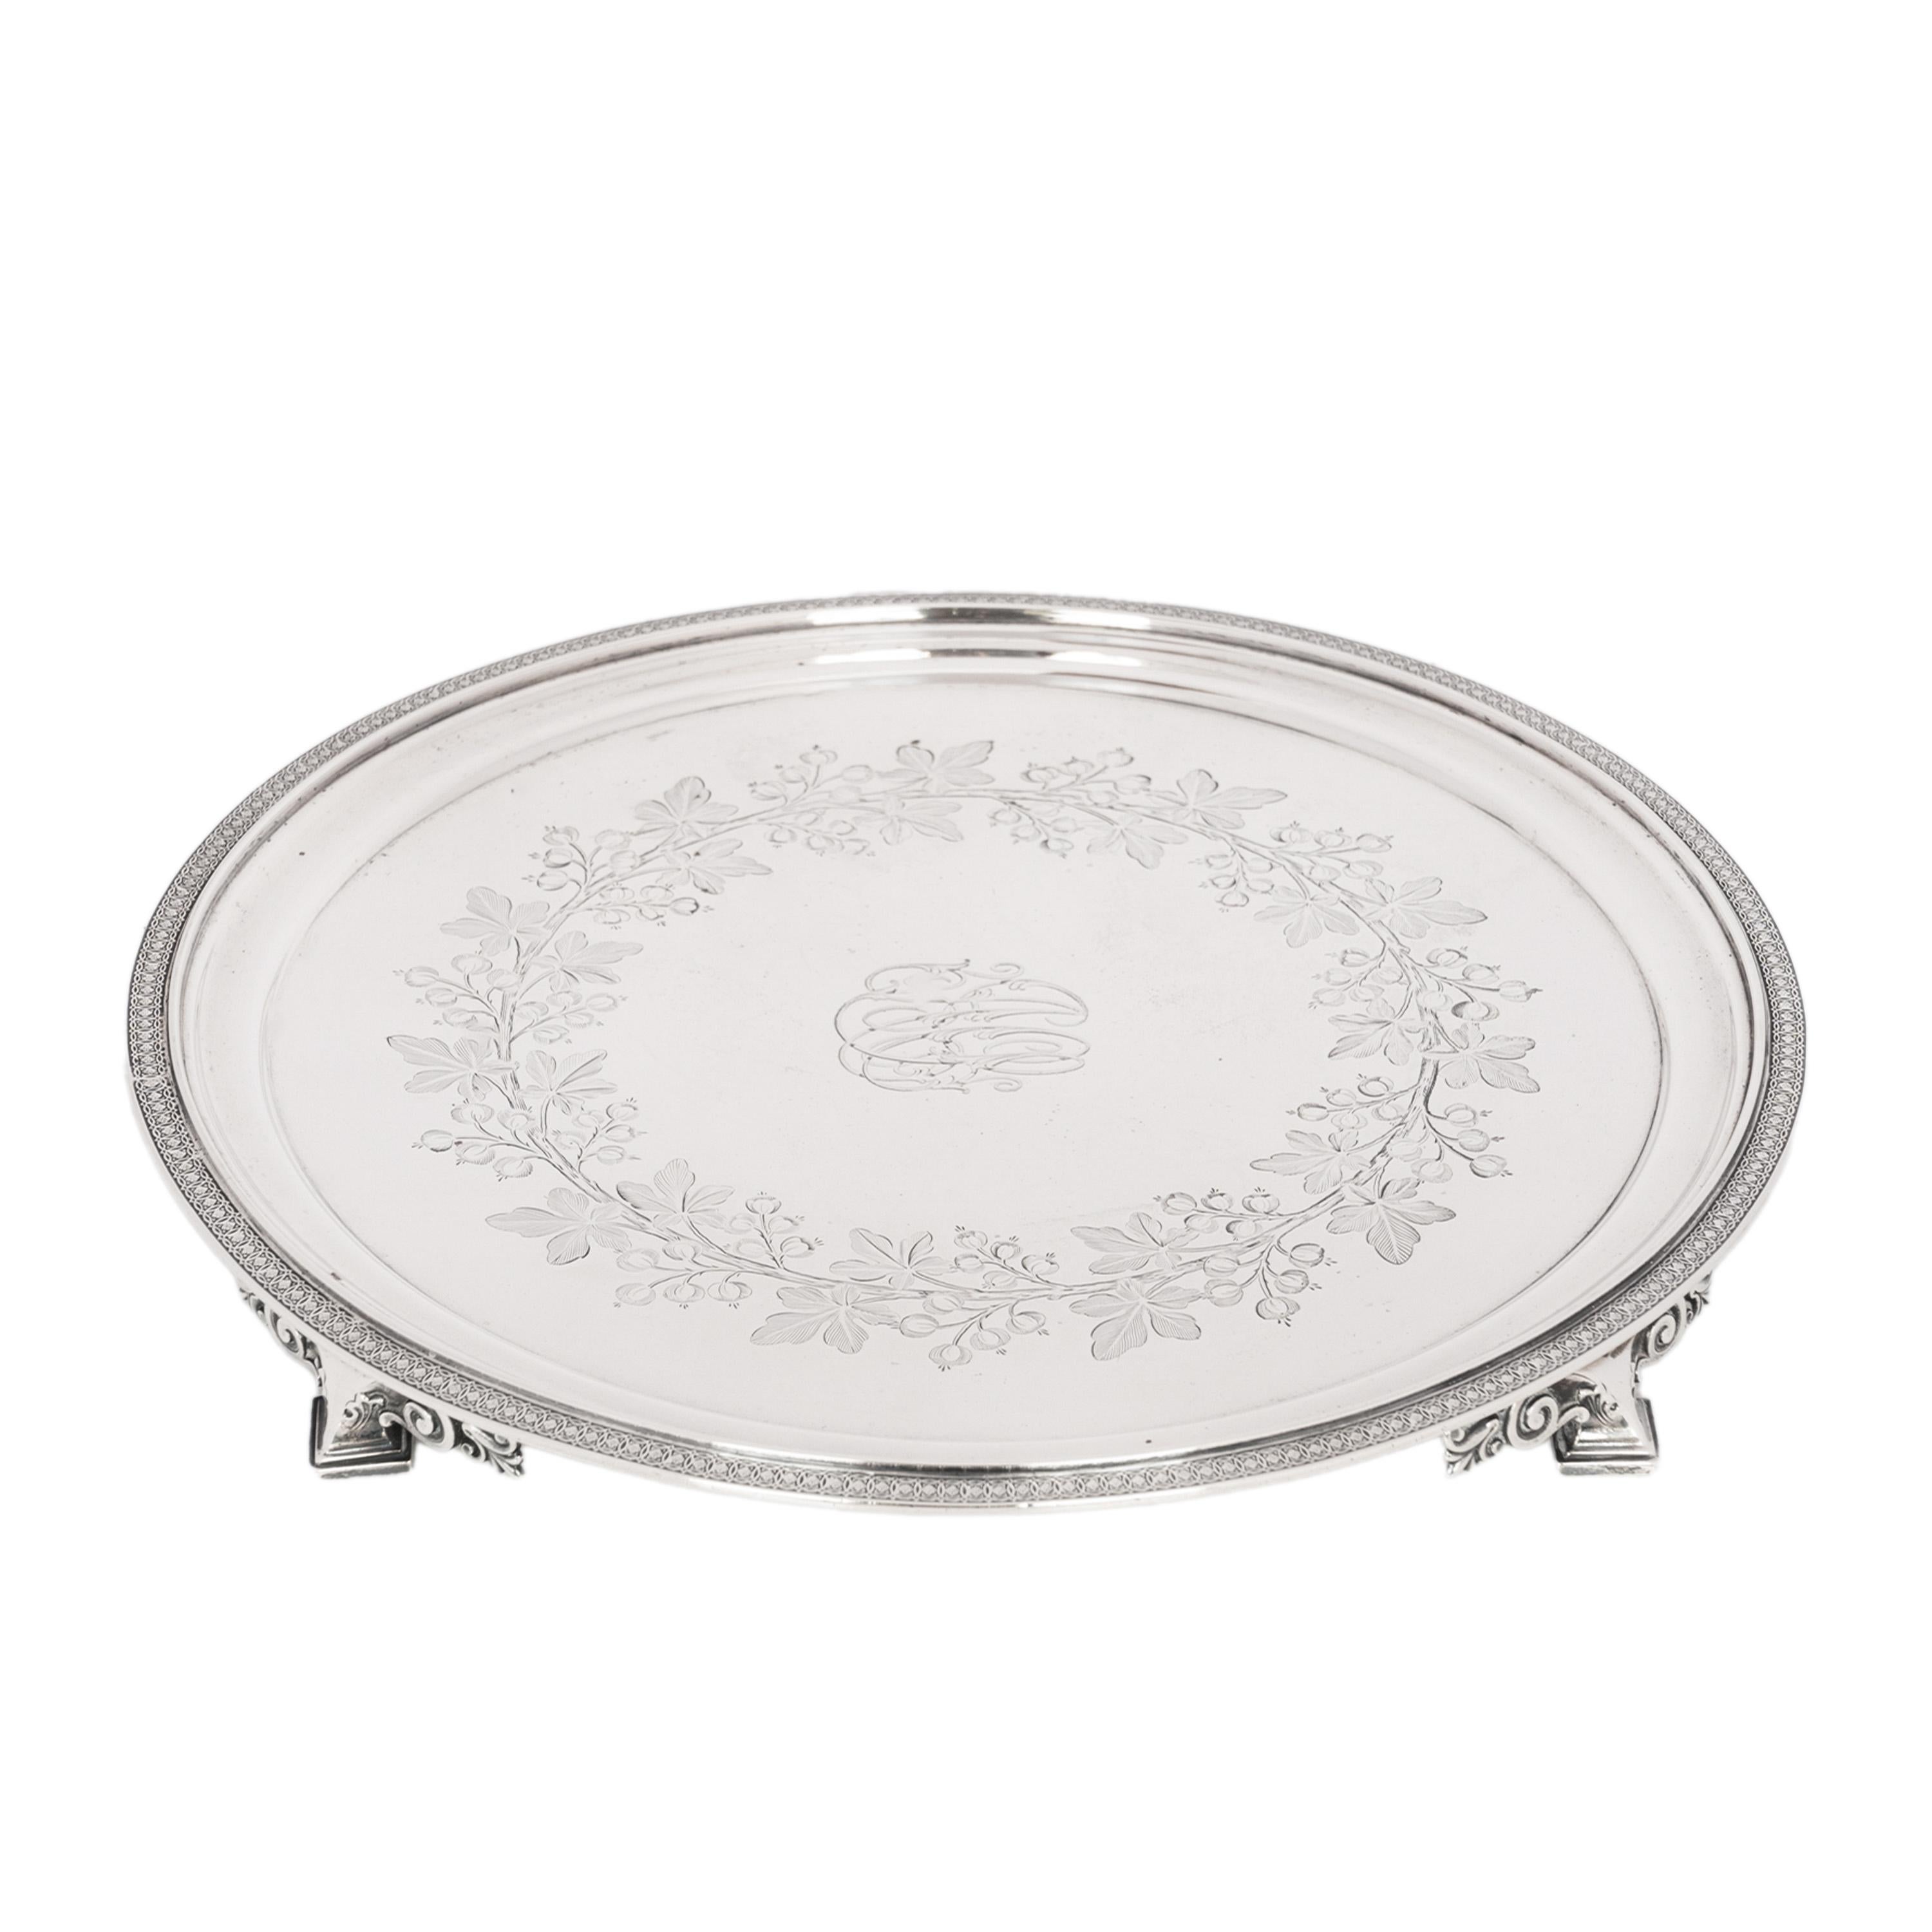 Antique Engraved Sterling Silver Tiffany & Co Footed Salver Tray New York 1870 In Good Condition For Sale In Portland, OR